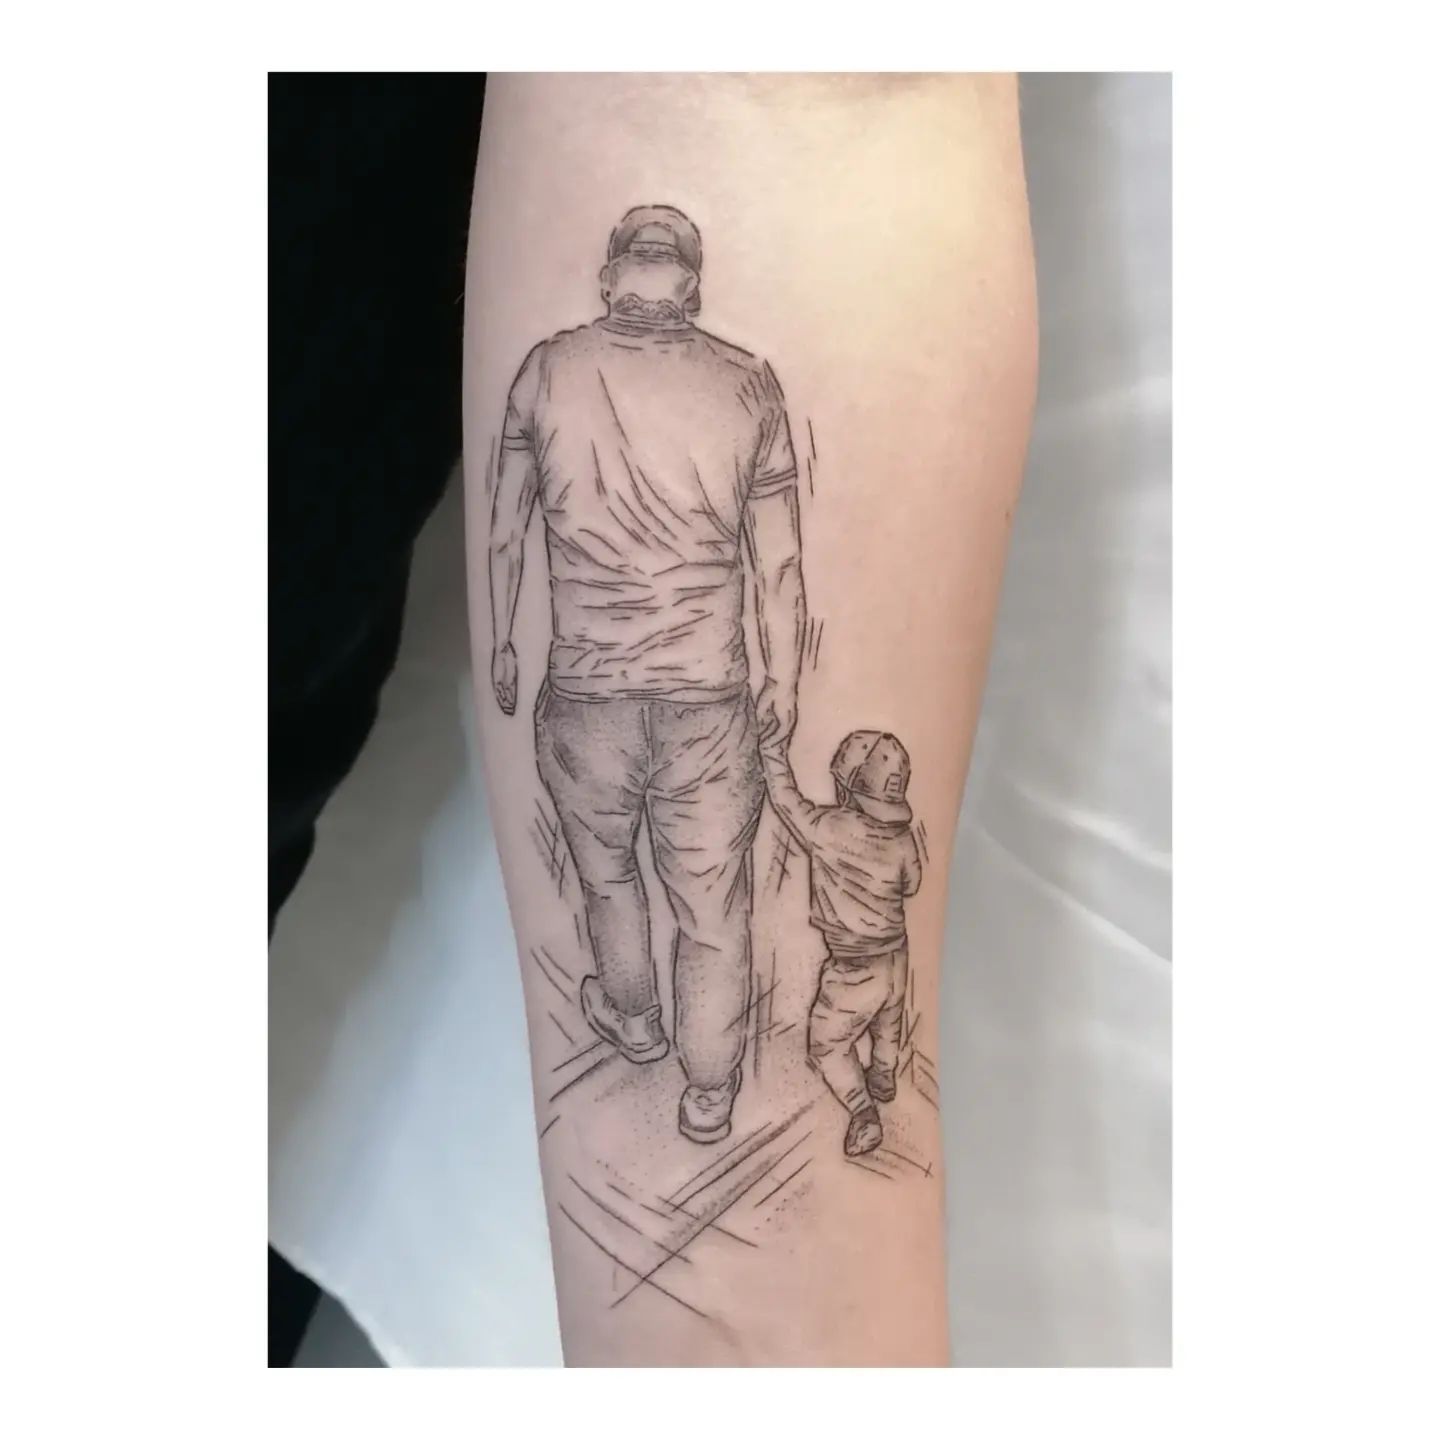 30 Father-Son Tattoo Ideas to Honor the Special Relationship - 100 Tattoos